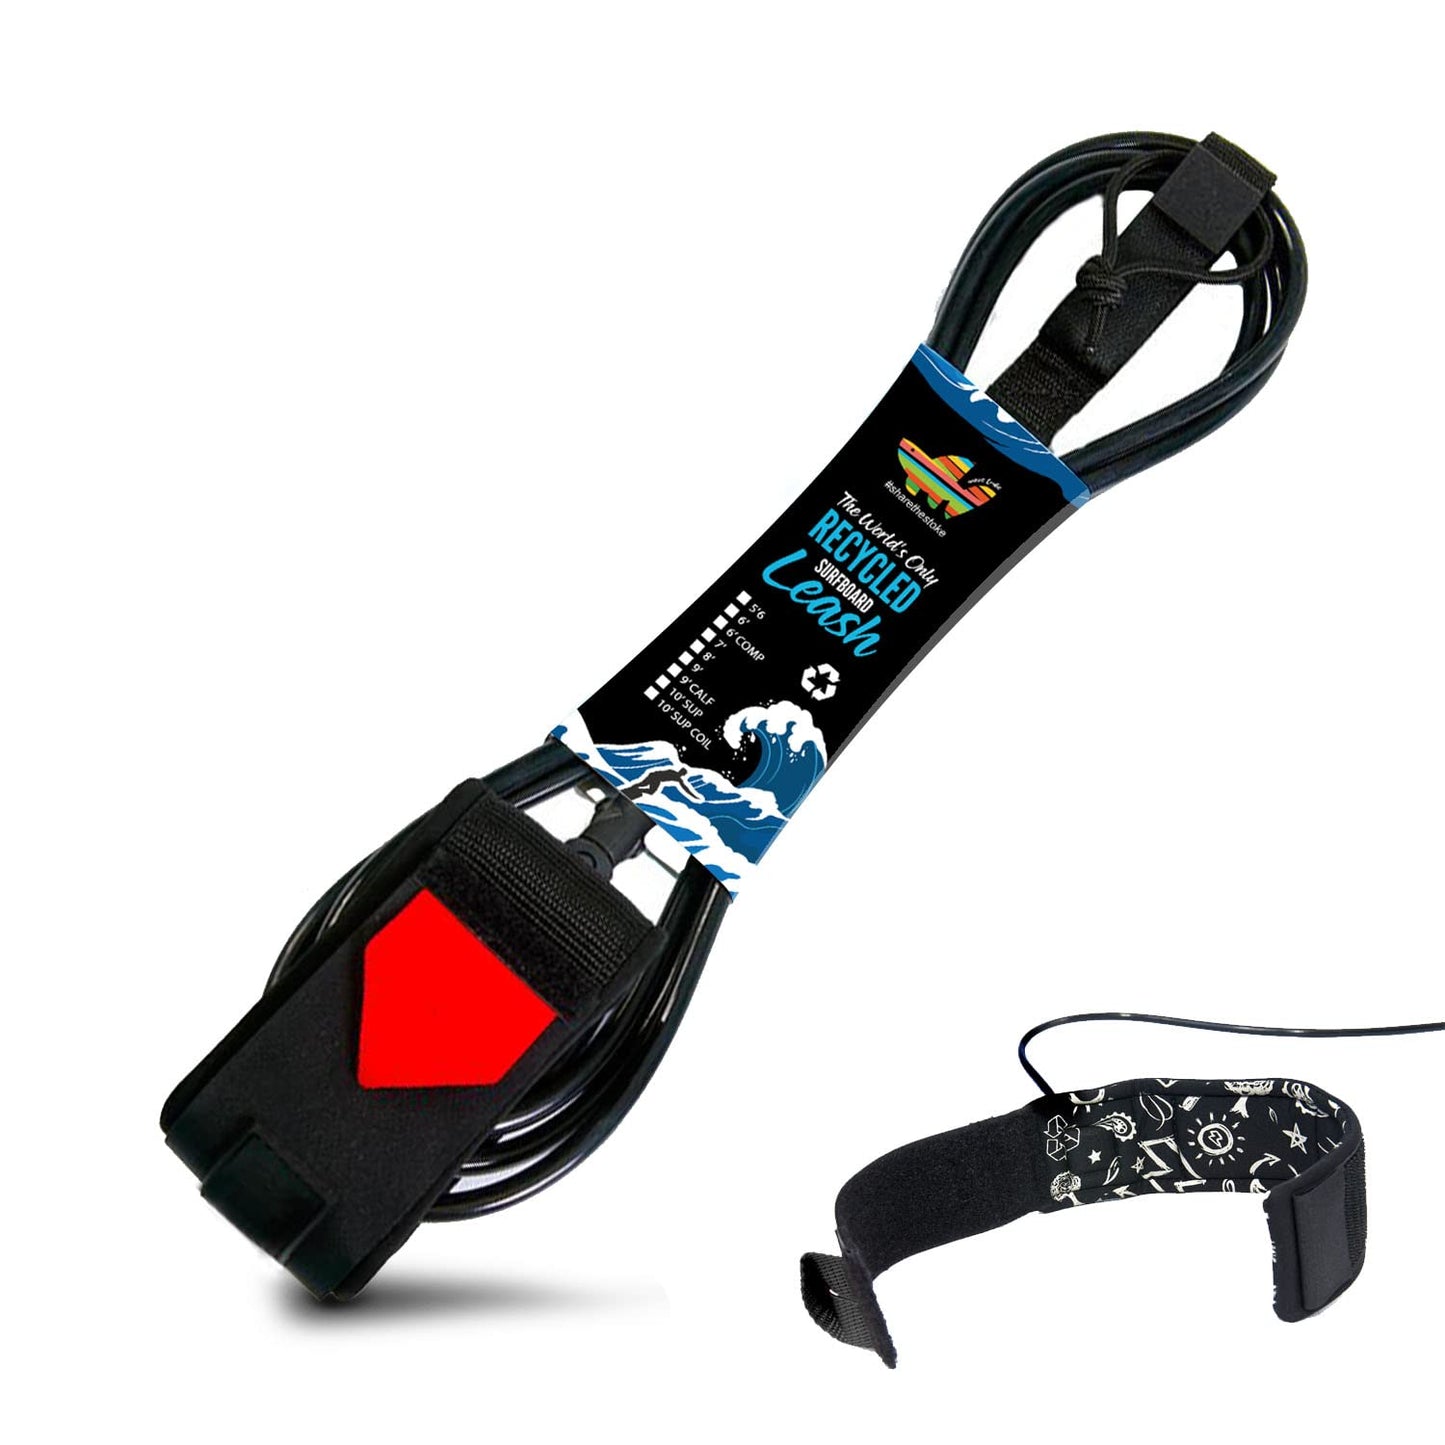 Wave Tribe ECO Surfboard Leash 'Strong Like Bull Never Break' - Premium Surf Leash Leash - Stainless Steel Triple Swivel, Rail Saver, Key Pocket, Leash Rope, Good for Planet, Heal The Oceans Campaign